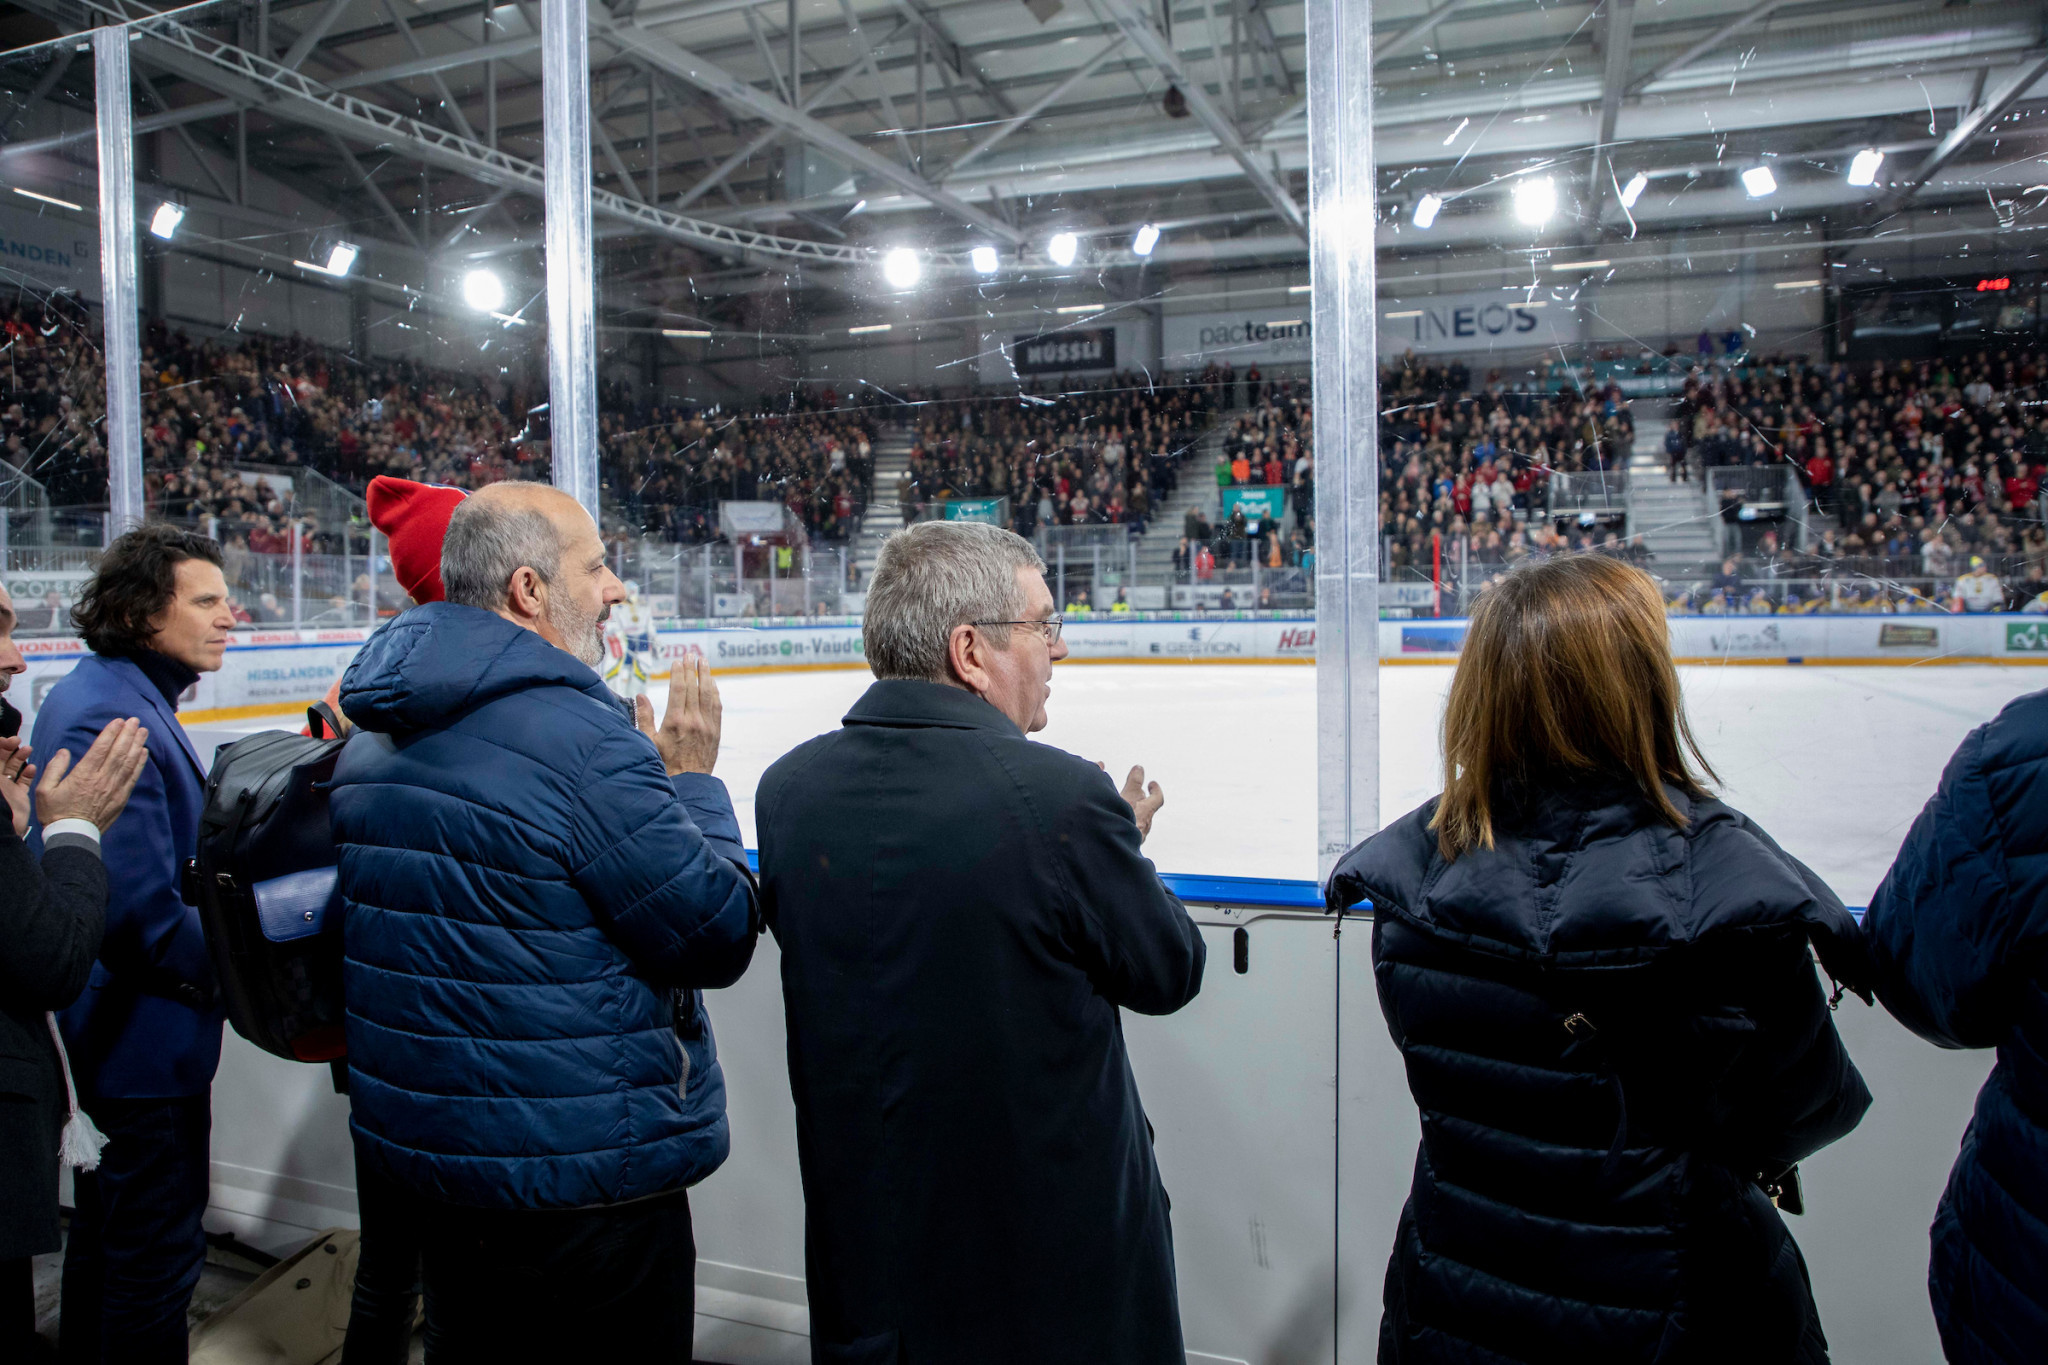 IOC President Thomas Bach was among the dignitaries in attendance at an ice hockey match in Lausanne, where mascot Yodli was unveiled ©IOC